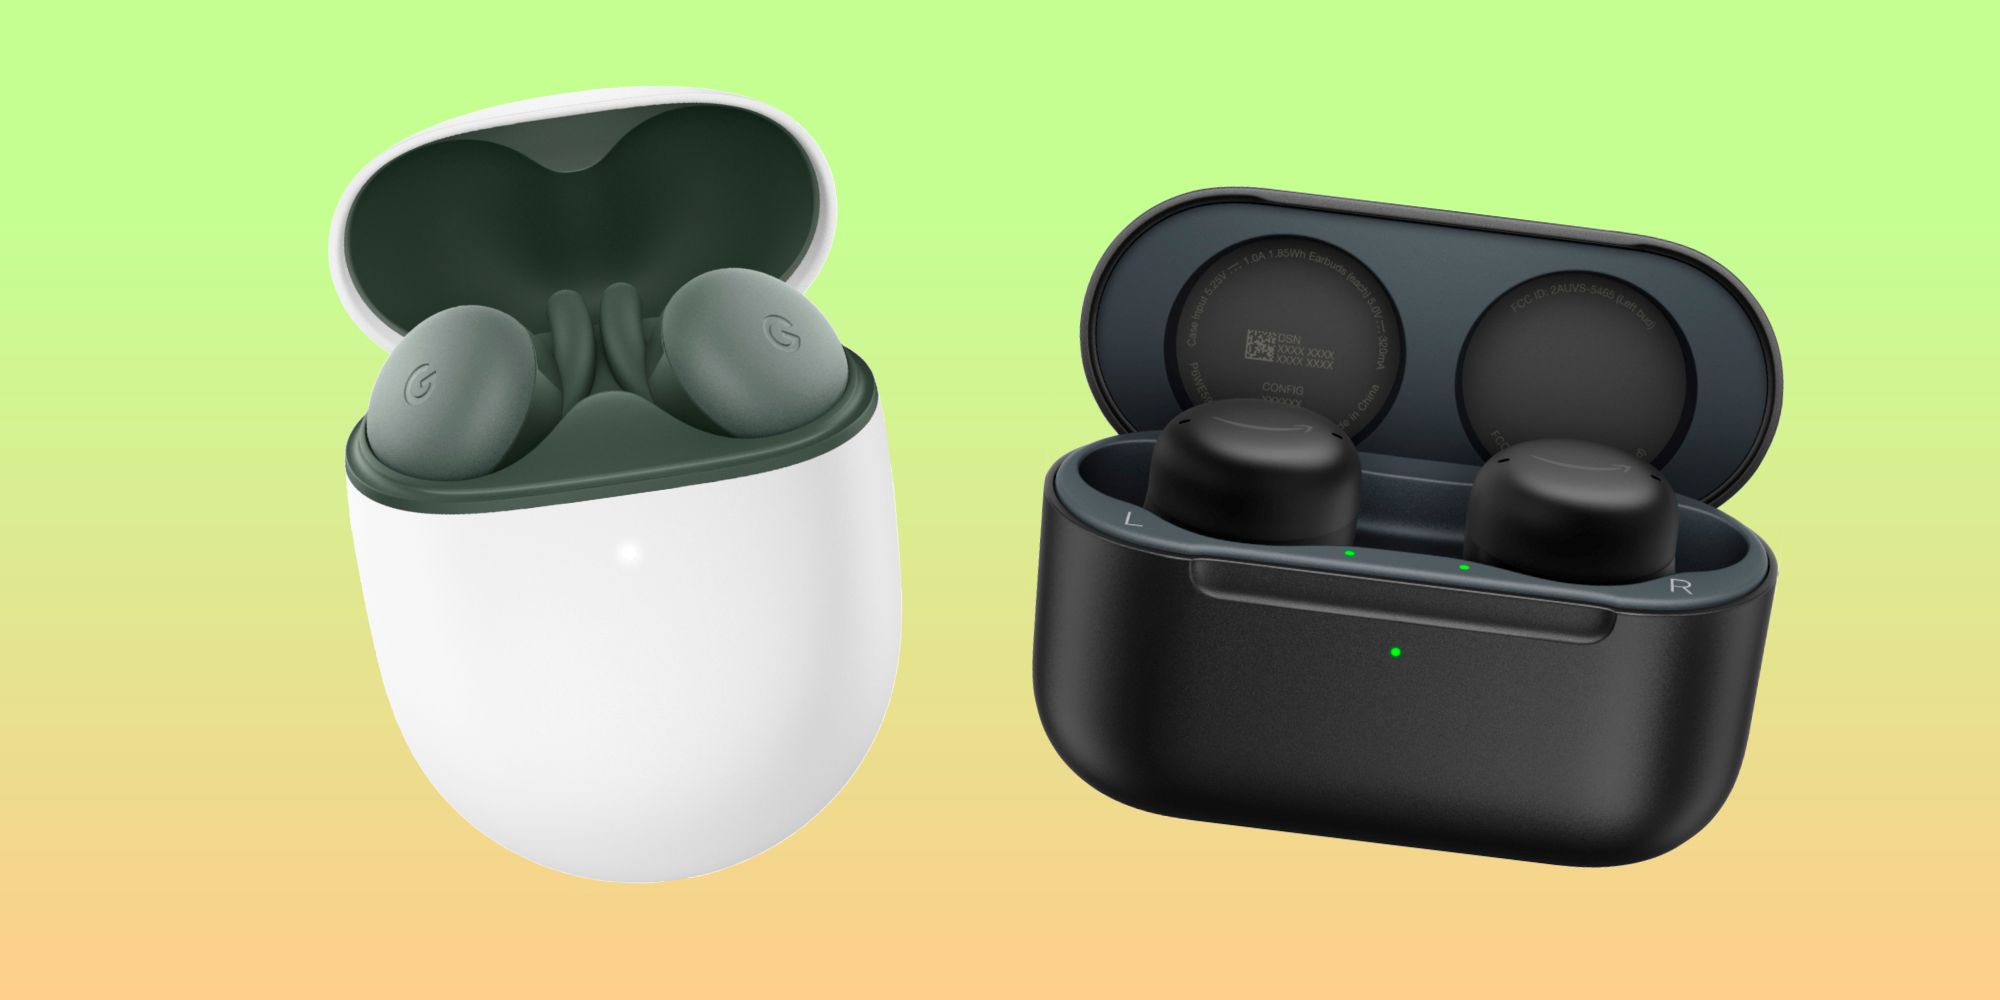 Google Pixel Buds A-Series and Amazon Echo Buds (2nd Gen)